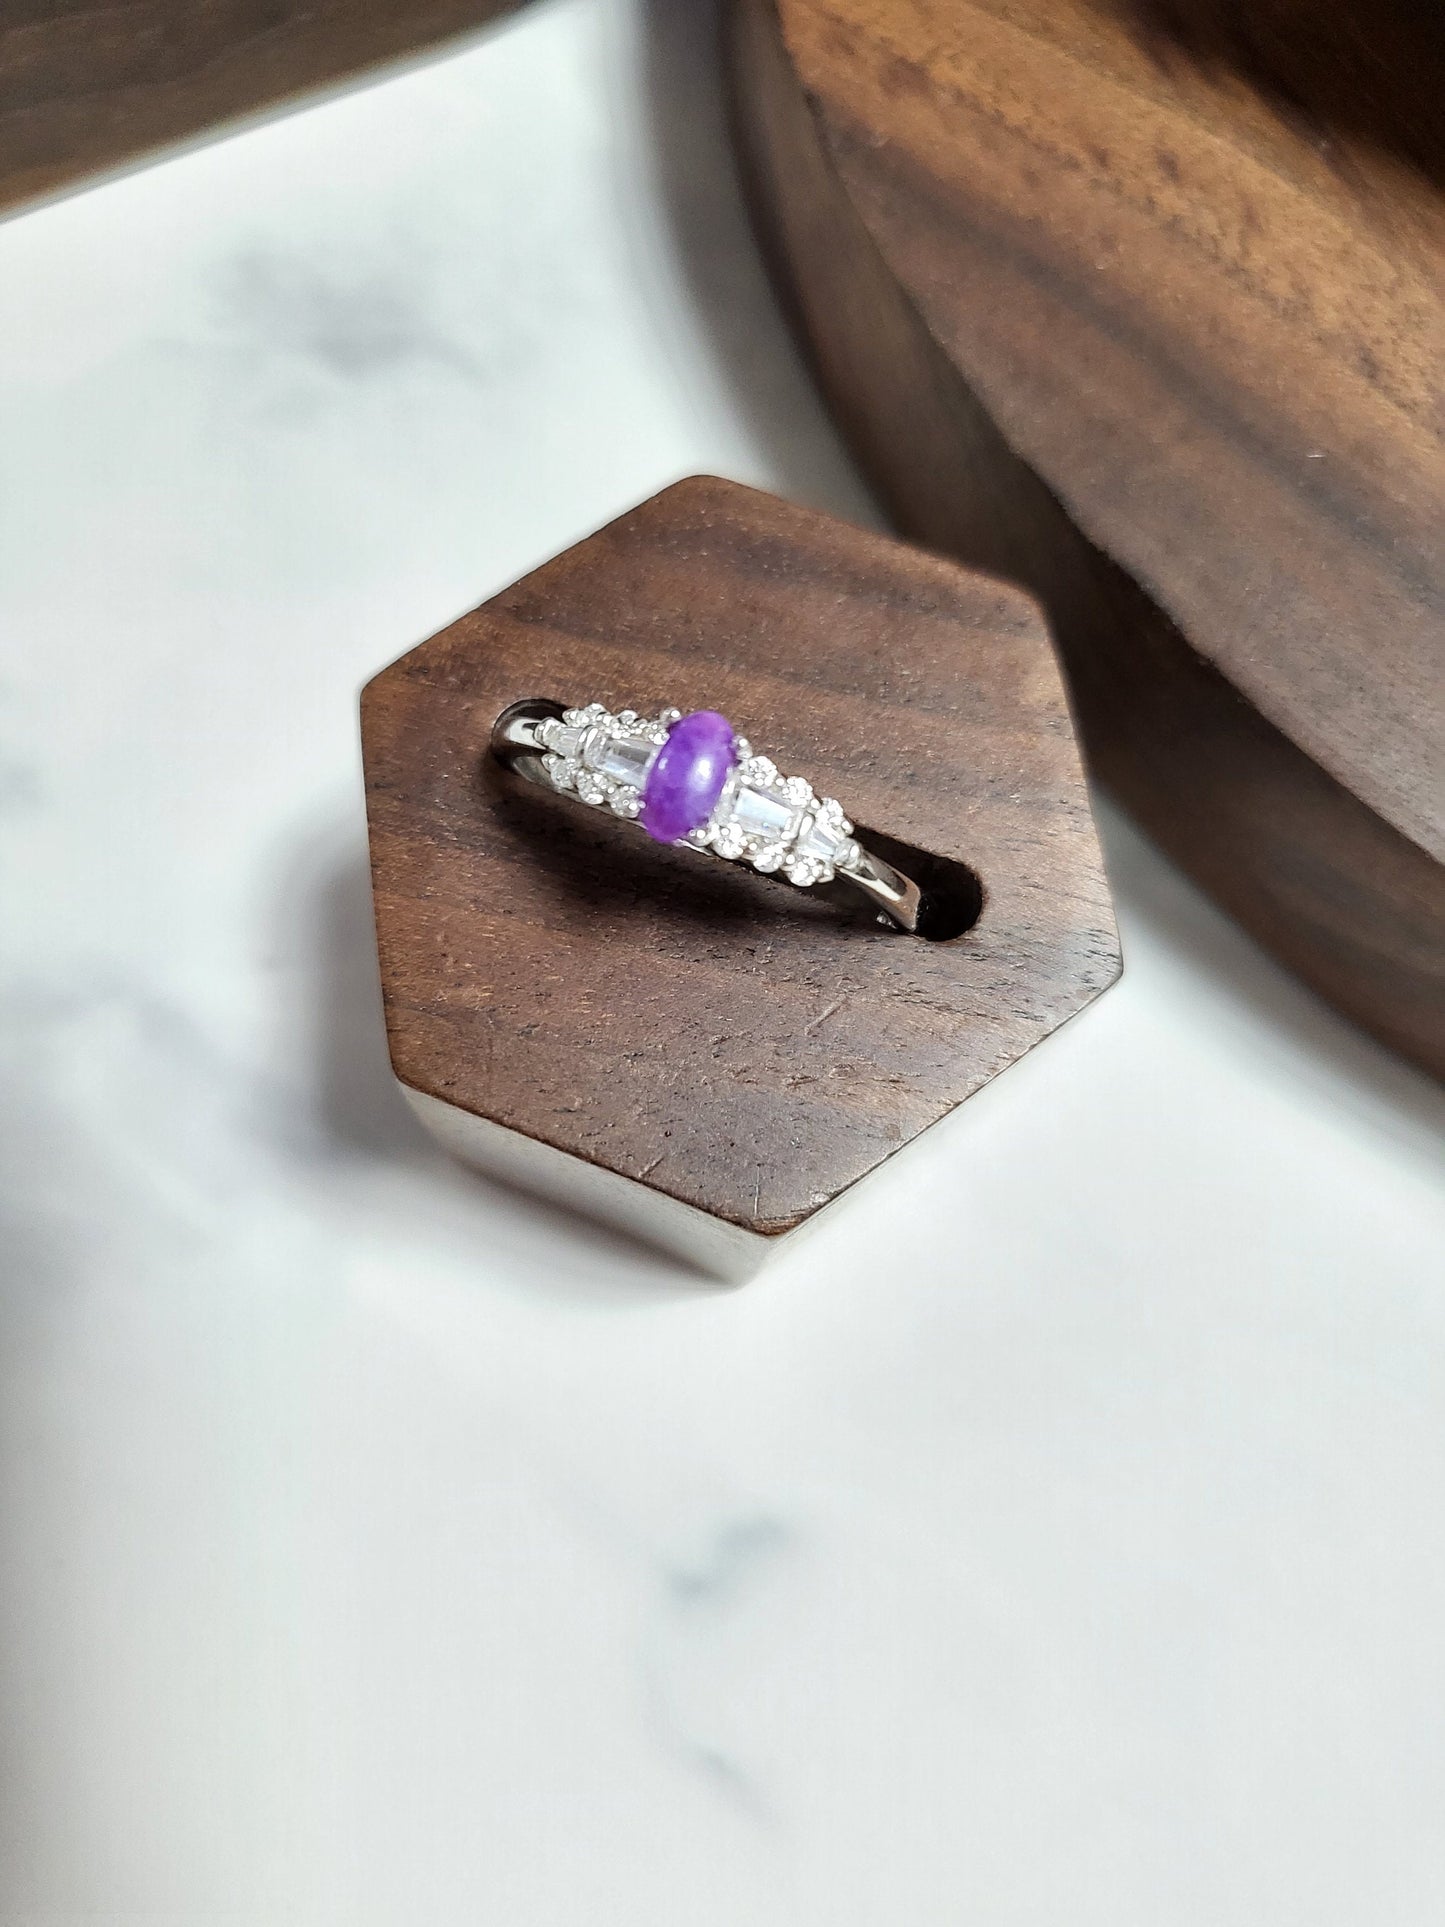 RARE Natural Sugilite Ring Raw Gel Grade Purple Gemstone Dainty Adjustable Silver Ring with Crystals